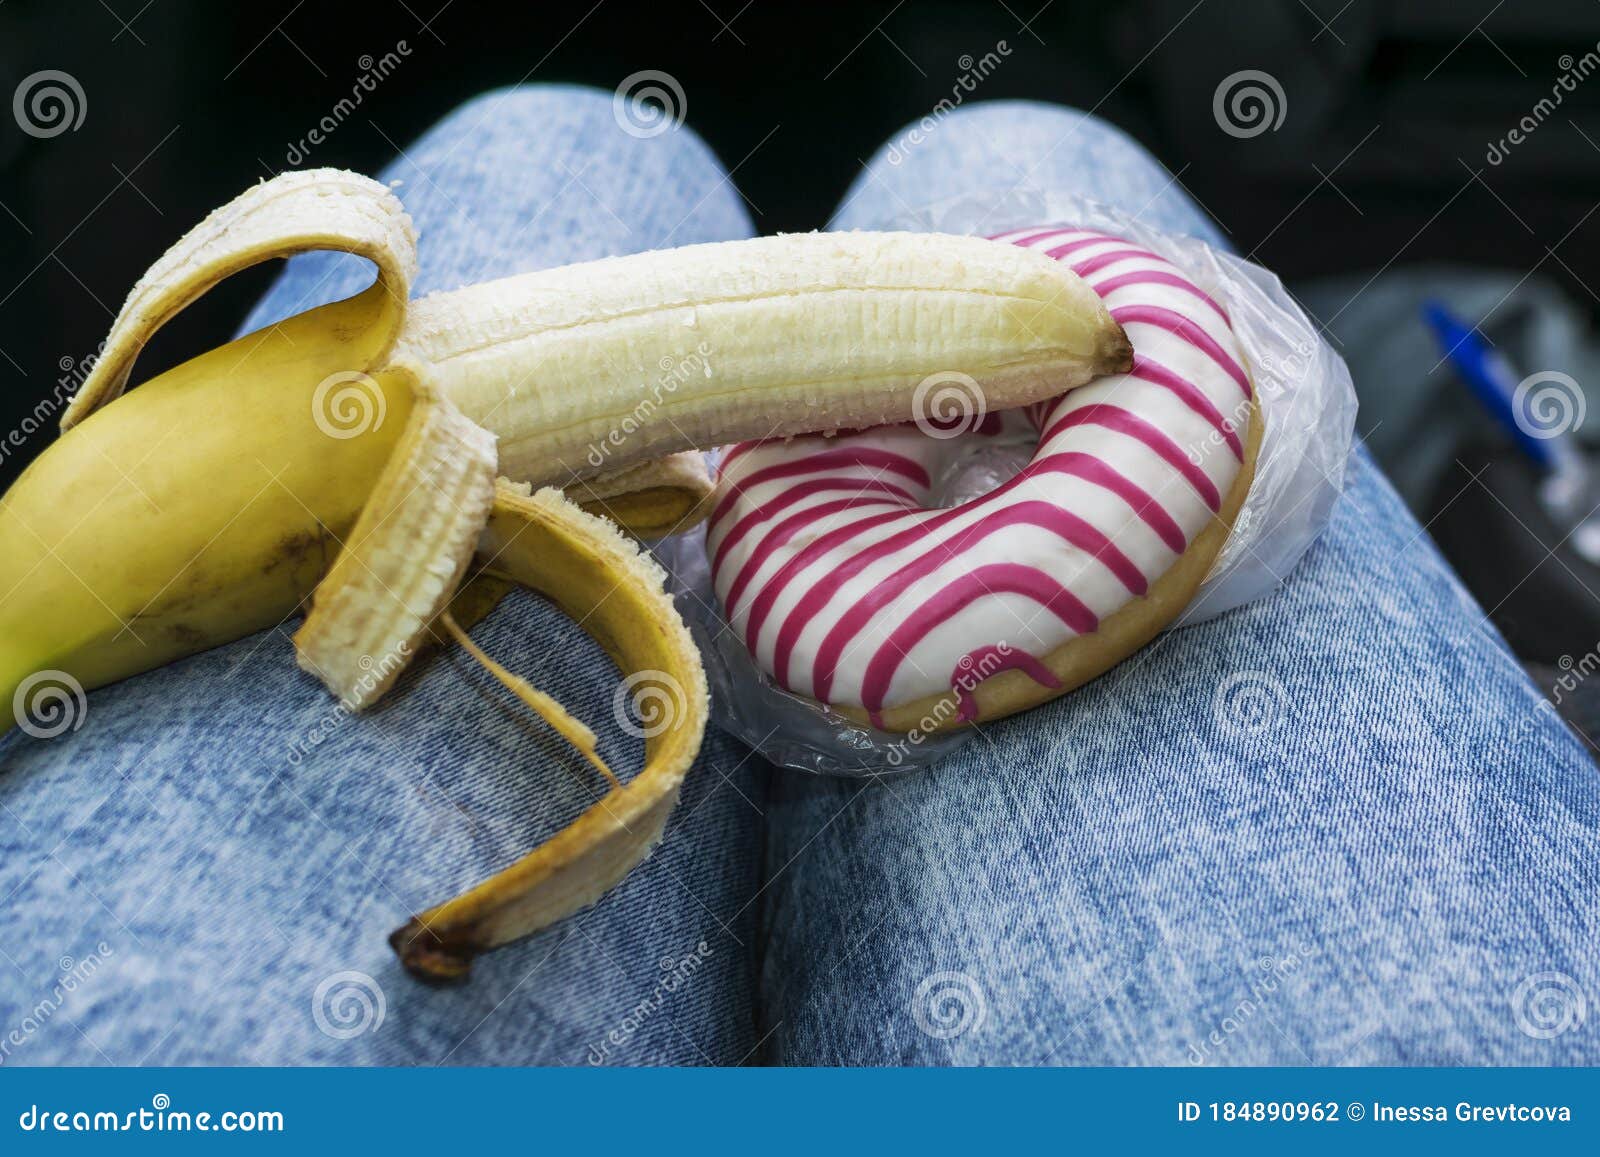 Sweet Doughnut And Peeled Banana Concept Of Sex And Eroticism Stock